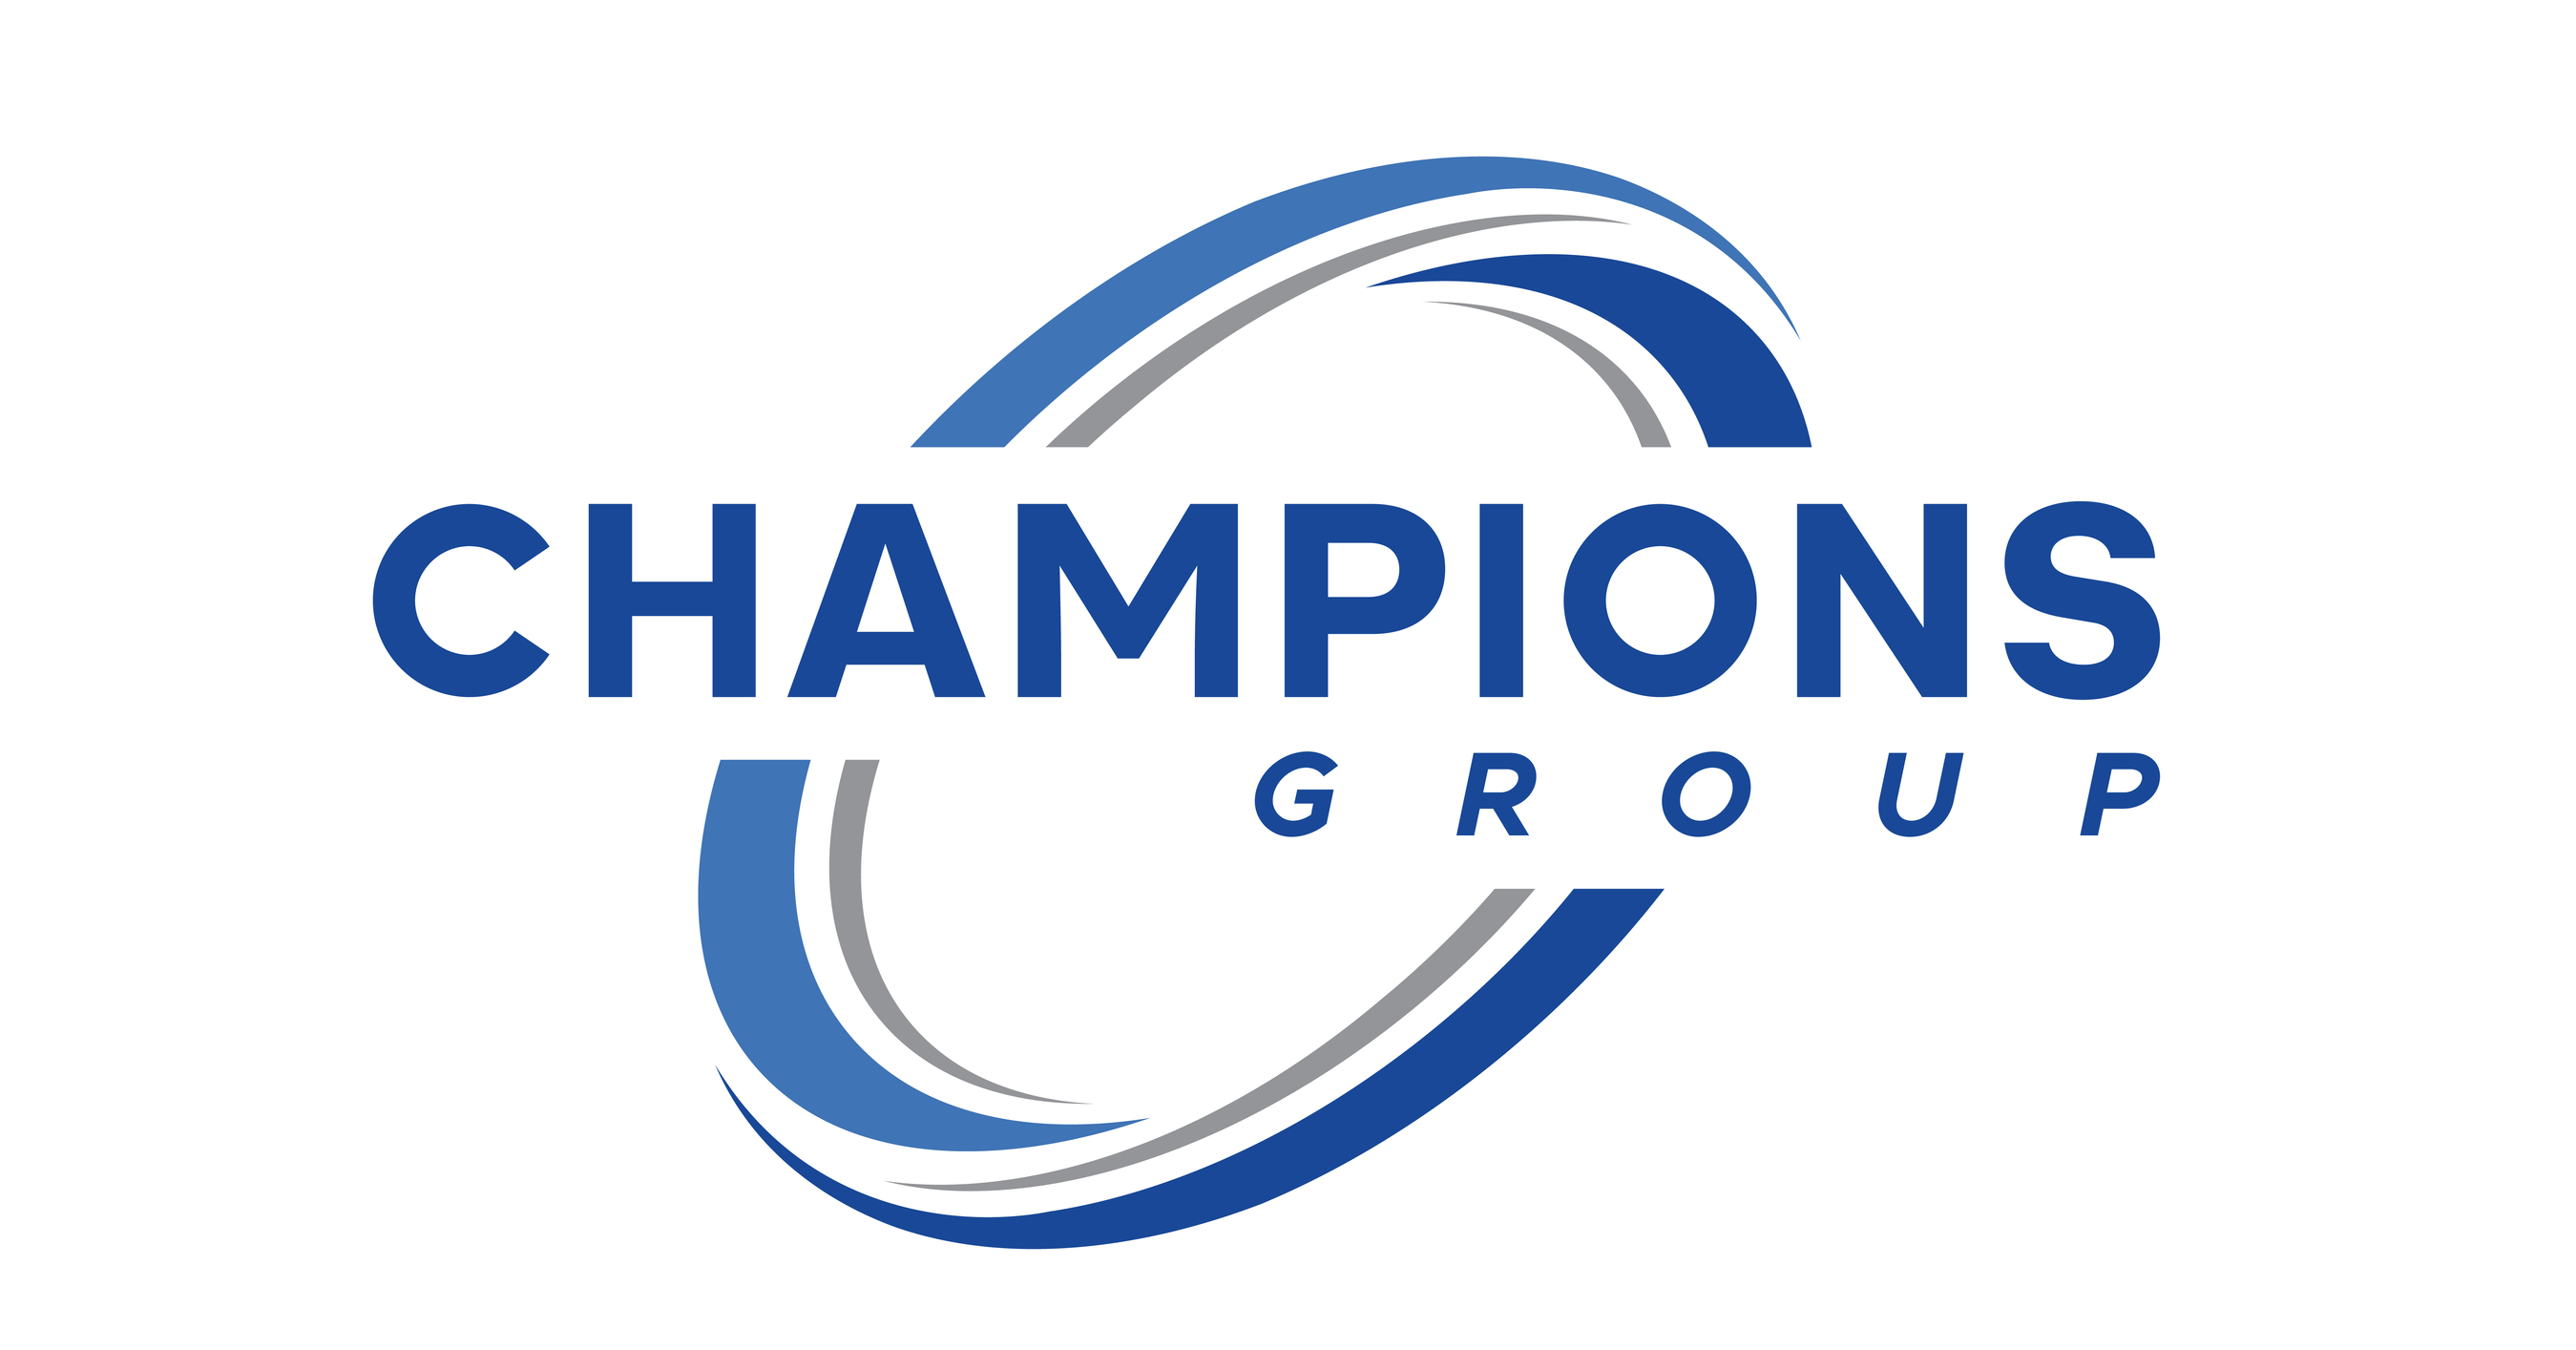 Company Champions Companions With Aid Plumbing, Heating, Cooling, Drains And Electric